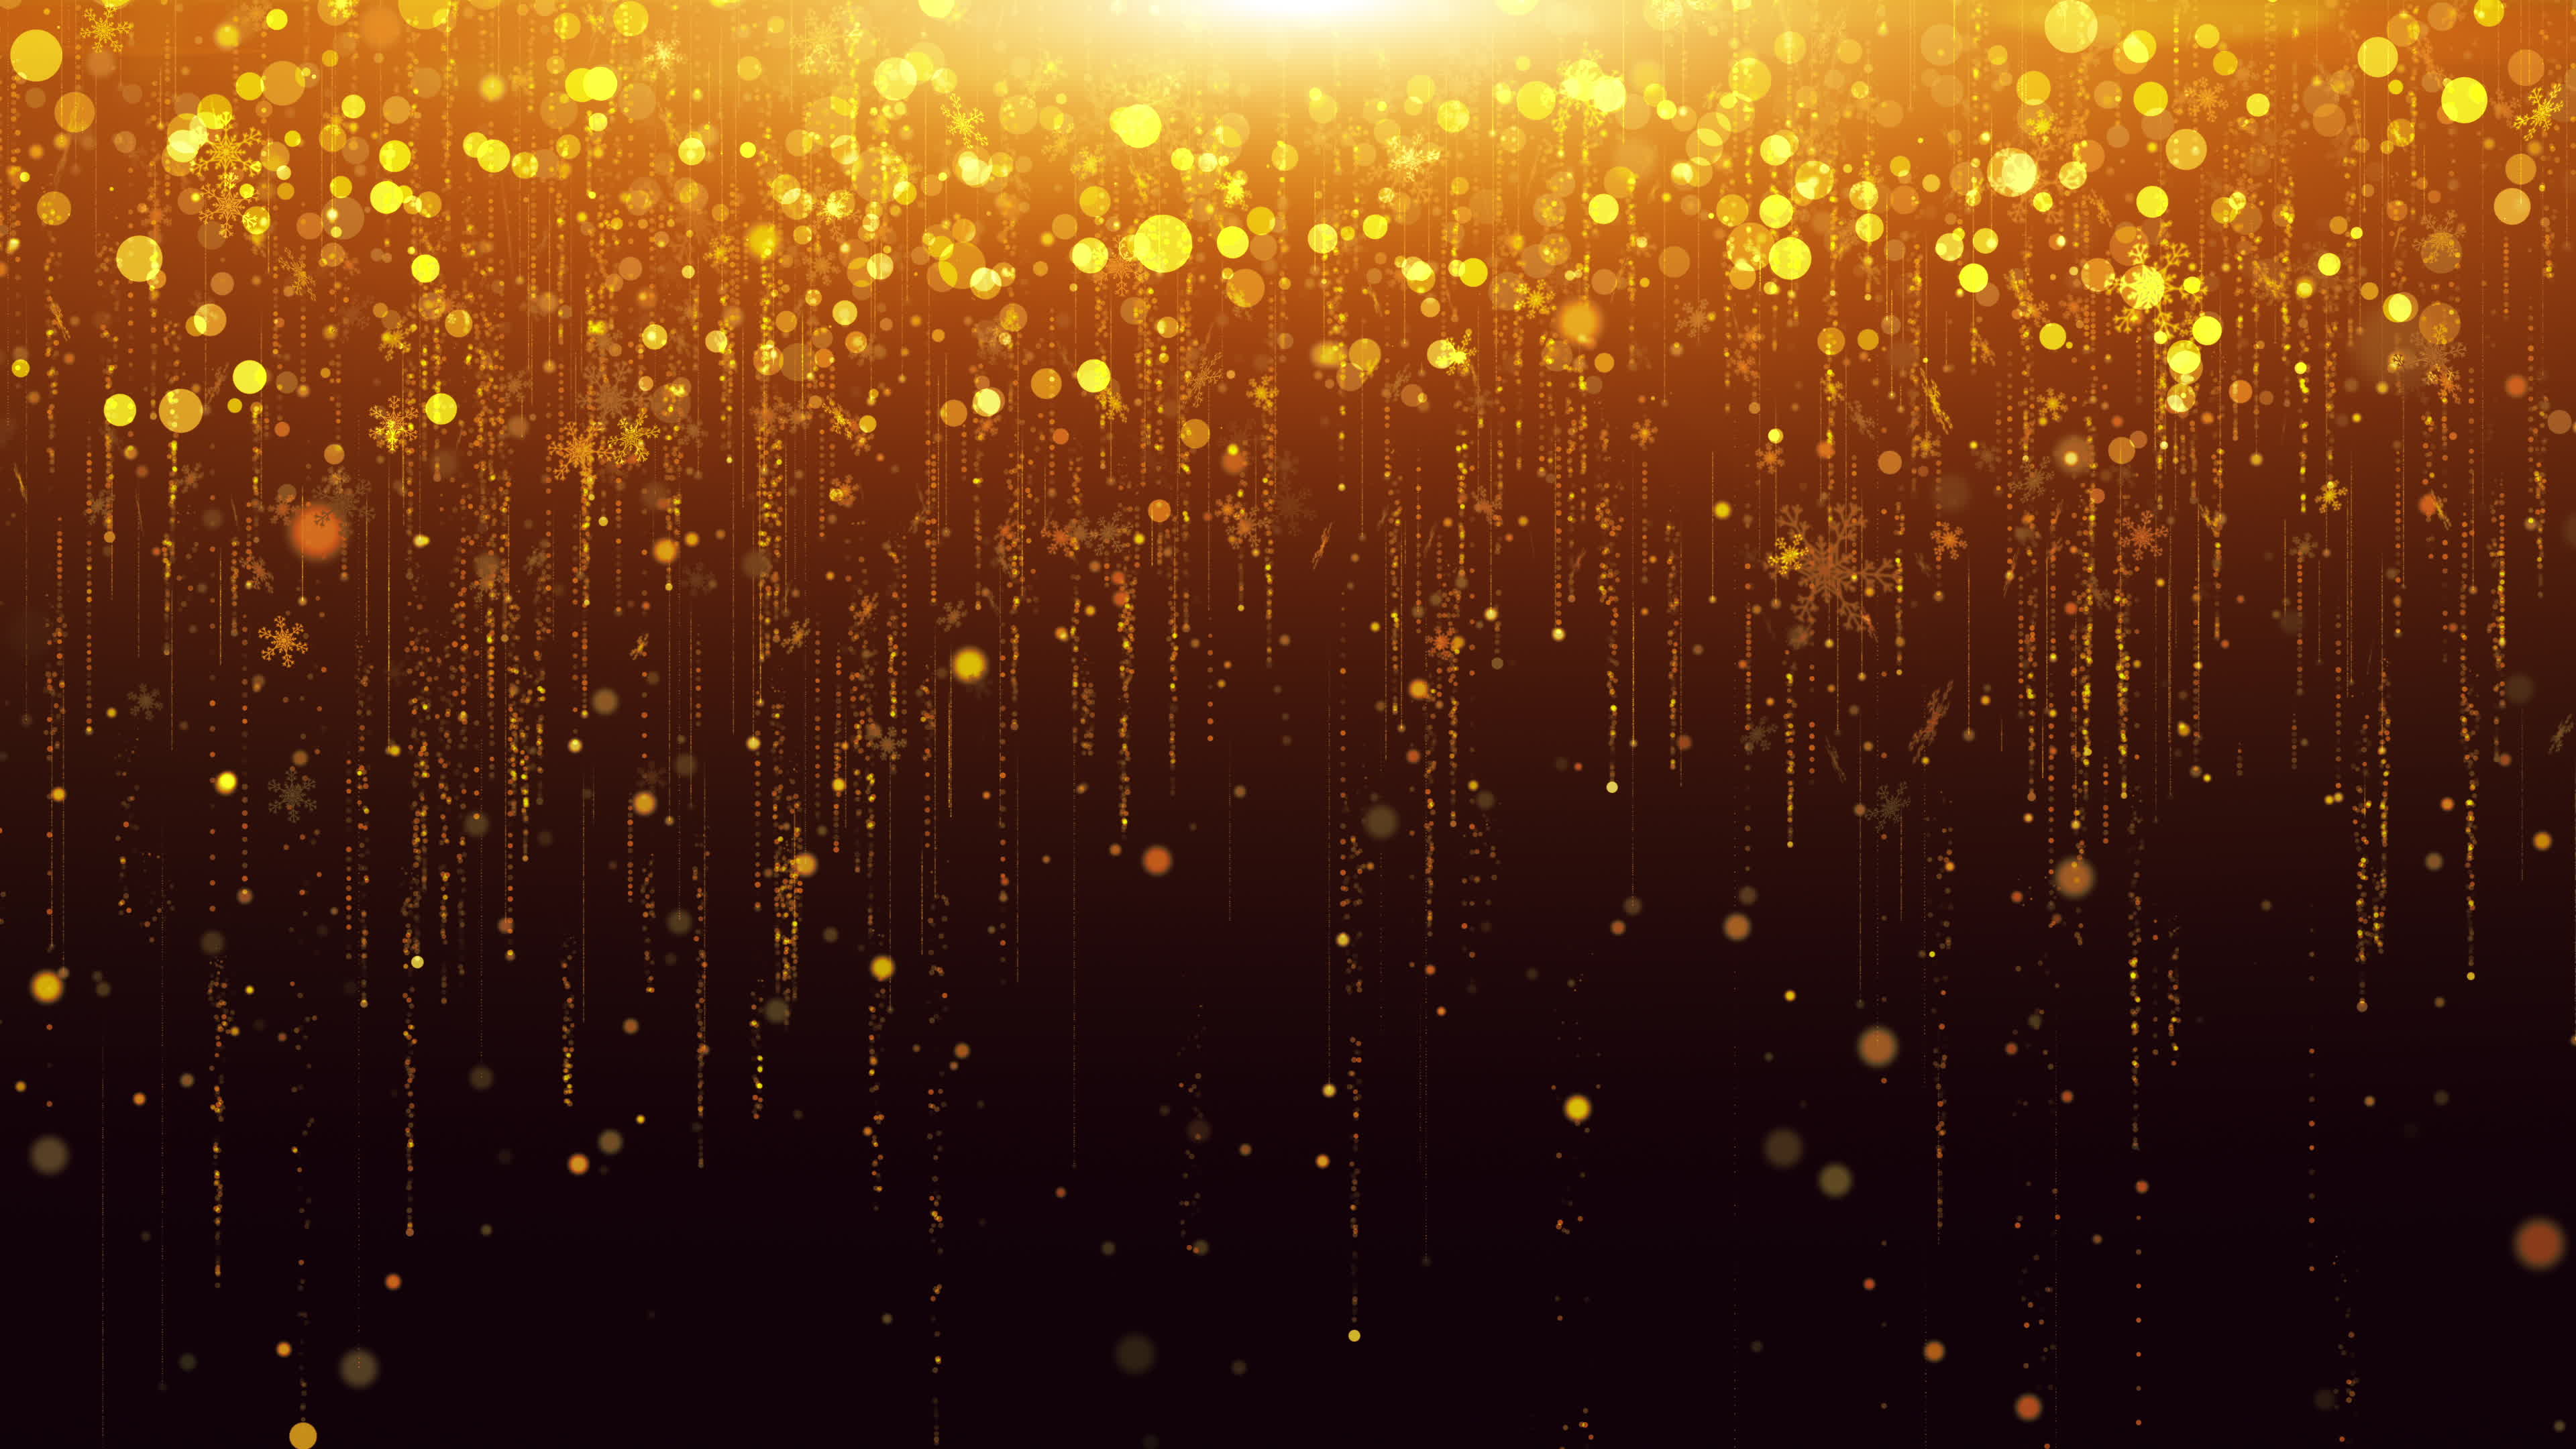 Gold Glitter Stock Video Footage for Free Download